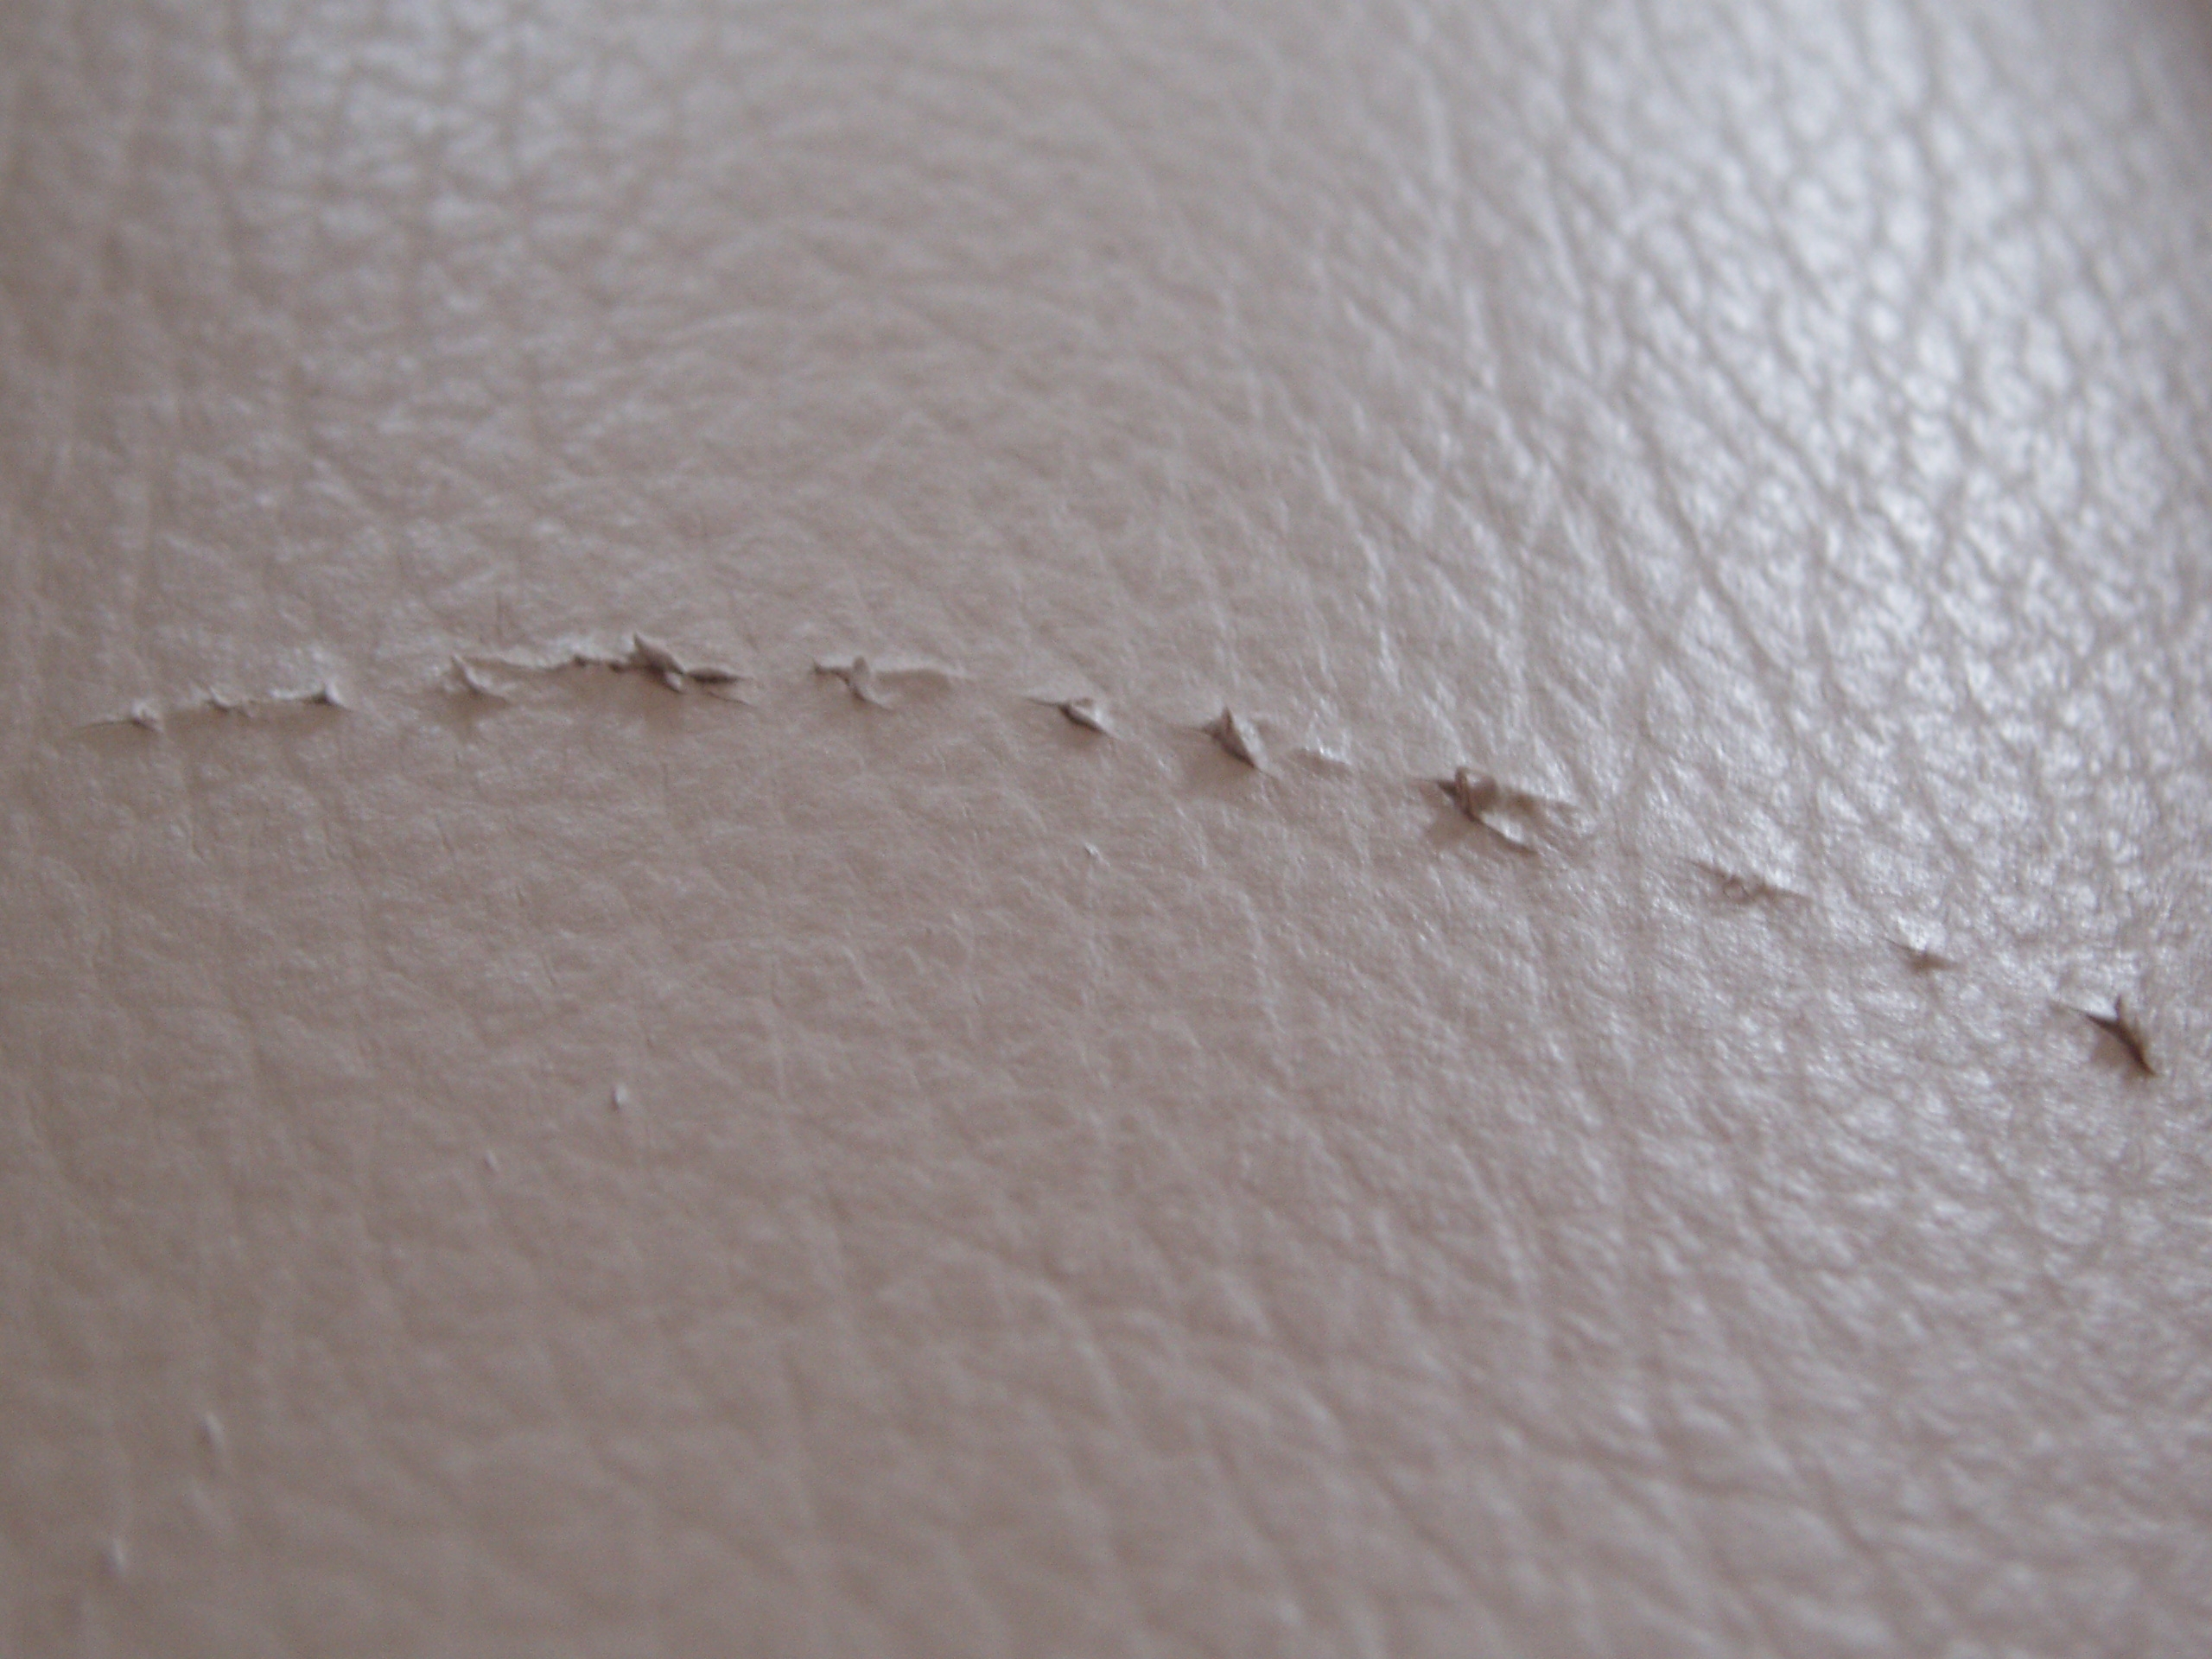 Fix Cat Scratches On Leather Couch, How To Repair Cat Scratches On Leather